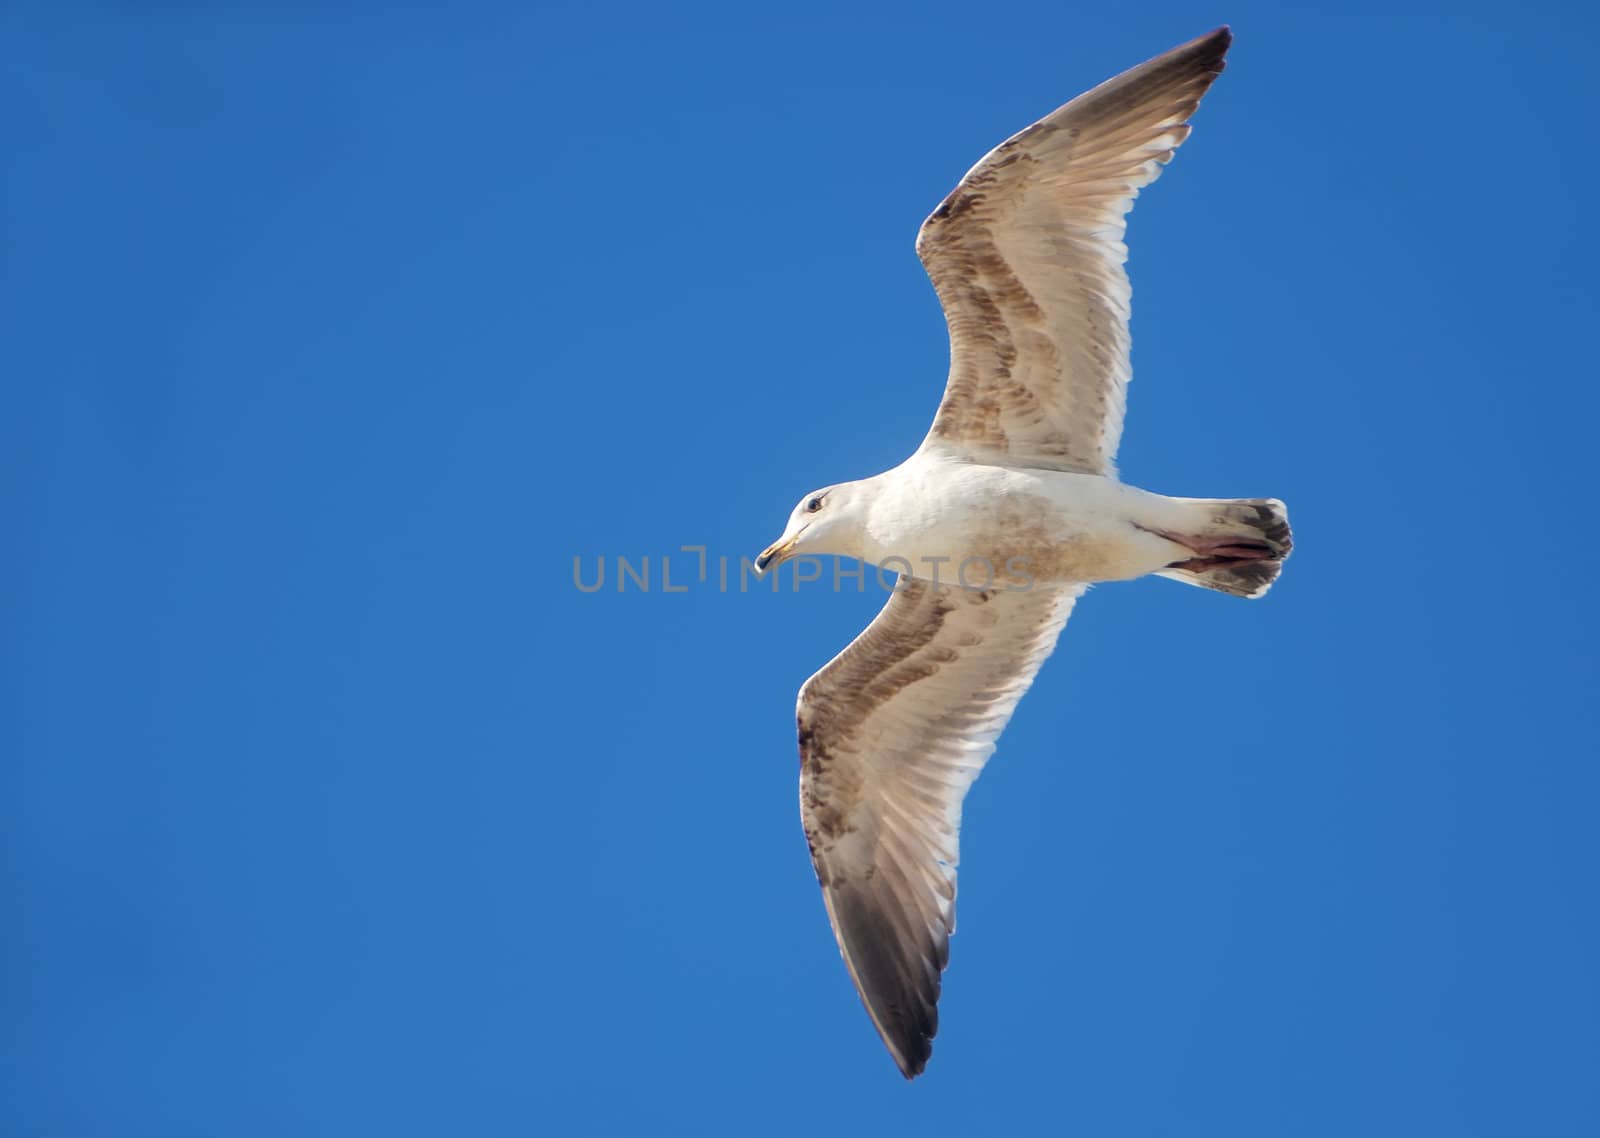 White and brown seagull flying with blue sky in the background.